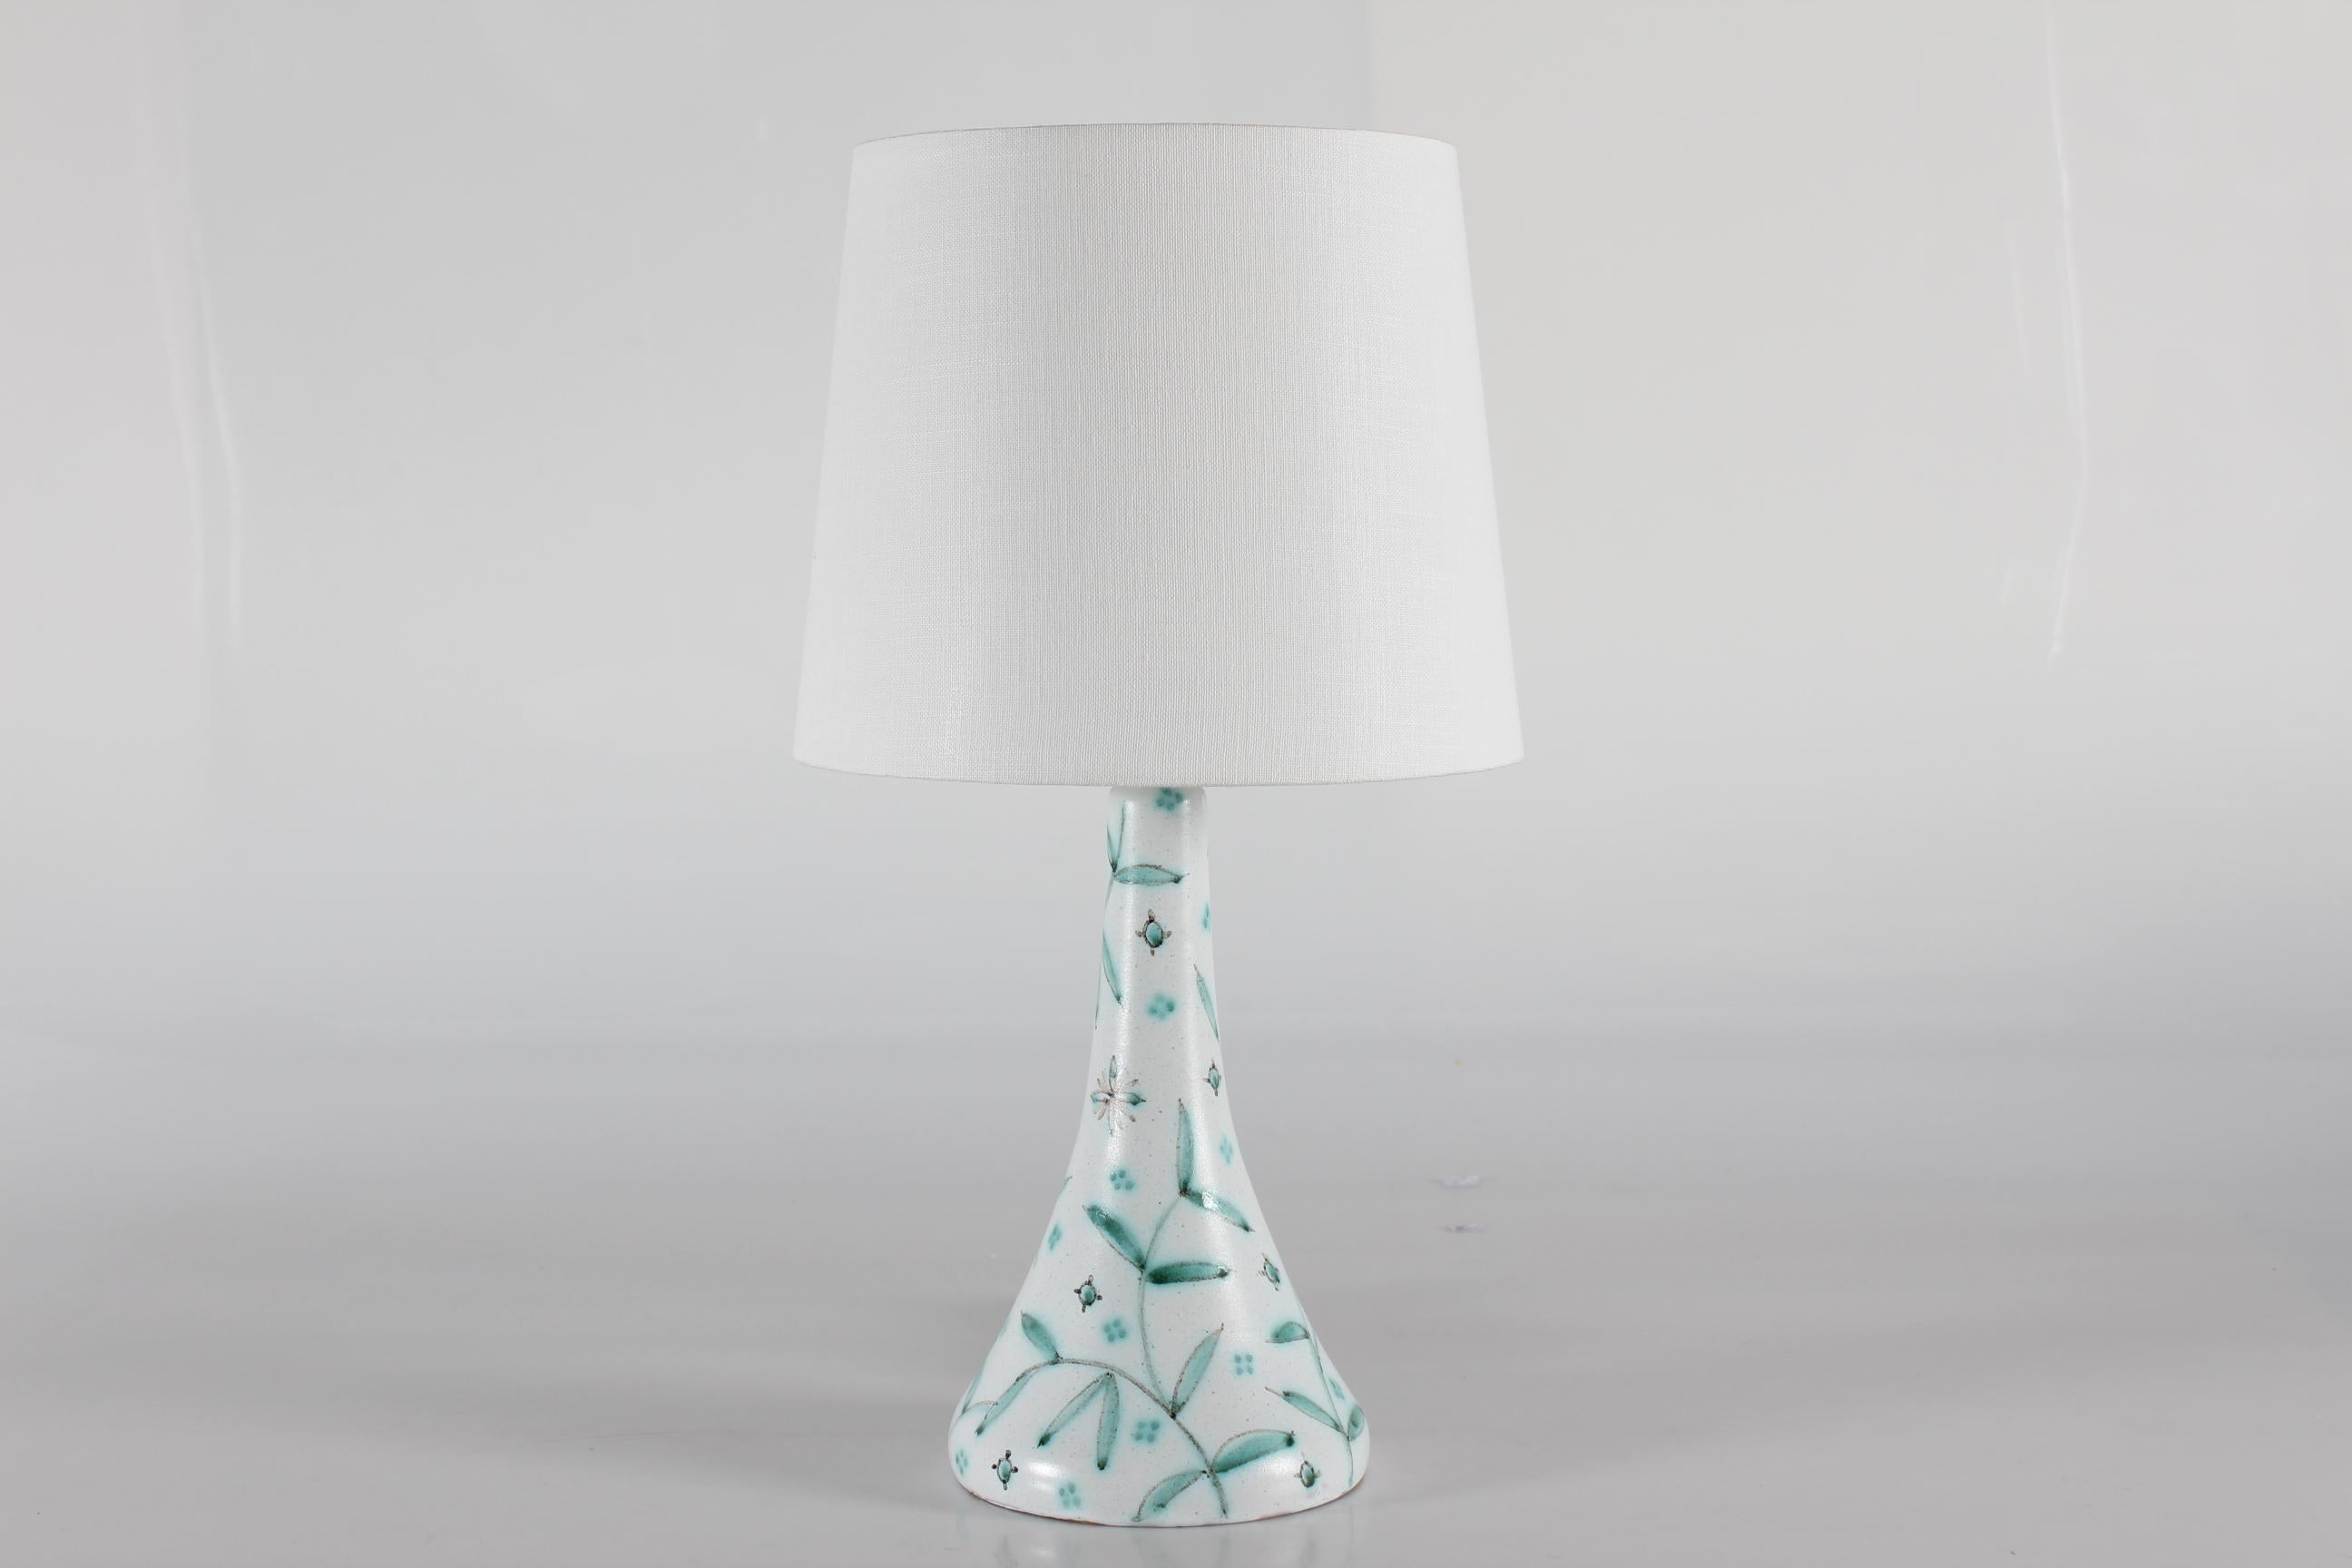 Mid-century ceramic table lamp by Danish Laurine Ceramics in Holbæk made in the 1950s.

The ceramic part is decorated by hand with a matte white base coat with pattern of slender leaves and small flower in mint green glaze.

Included is a new lamp